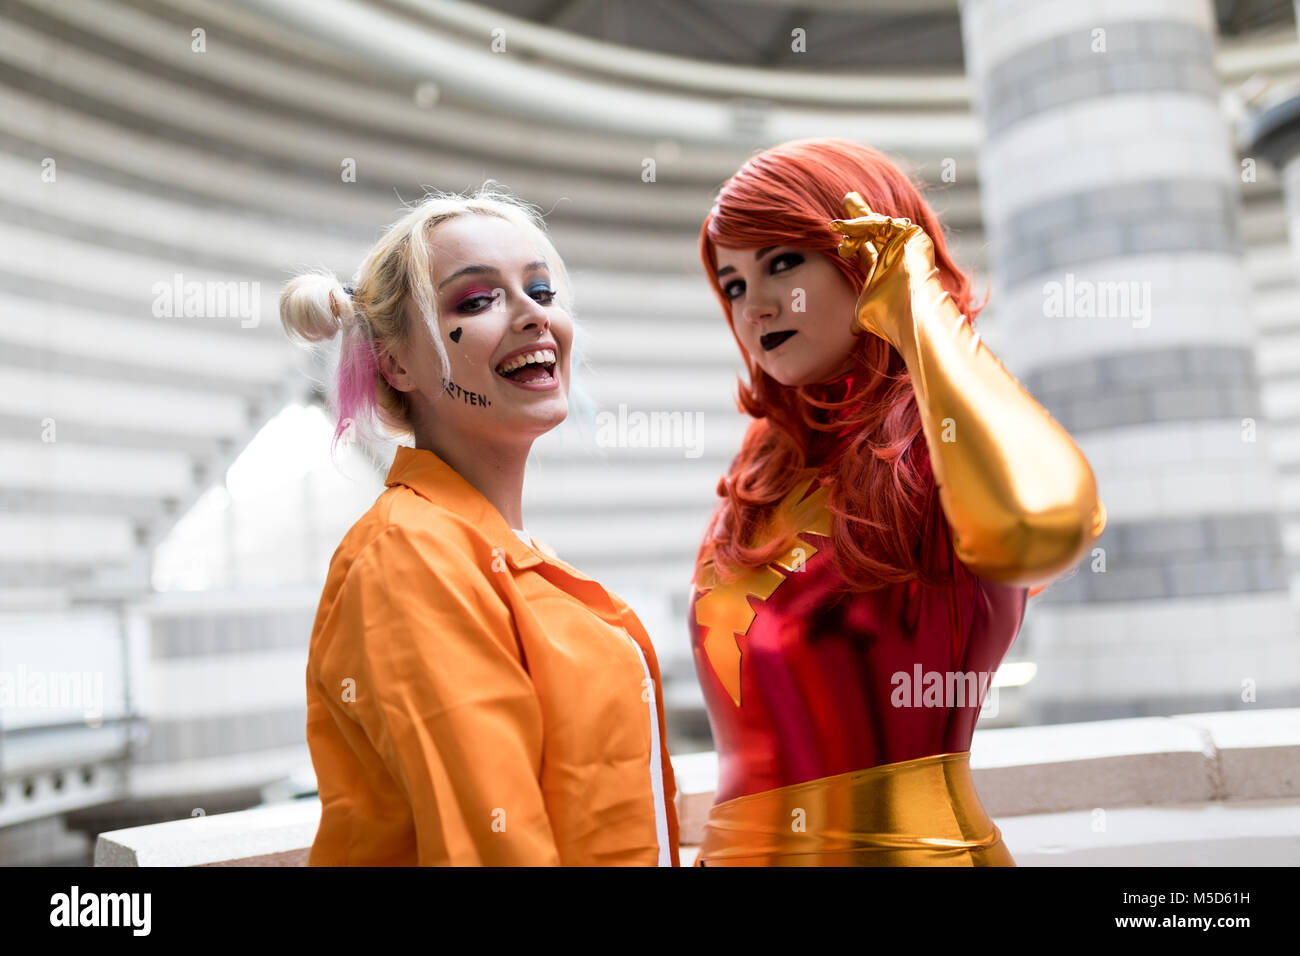 Doncaster Comic Con 11th Feruary 2018 at The Doncaster Dome UK. Two young women cosplay as Harley Quinn Suicidé Squad and Marvel’s Jean Grey Phoenix Stock Photo